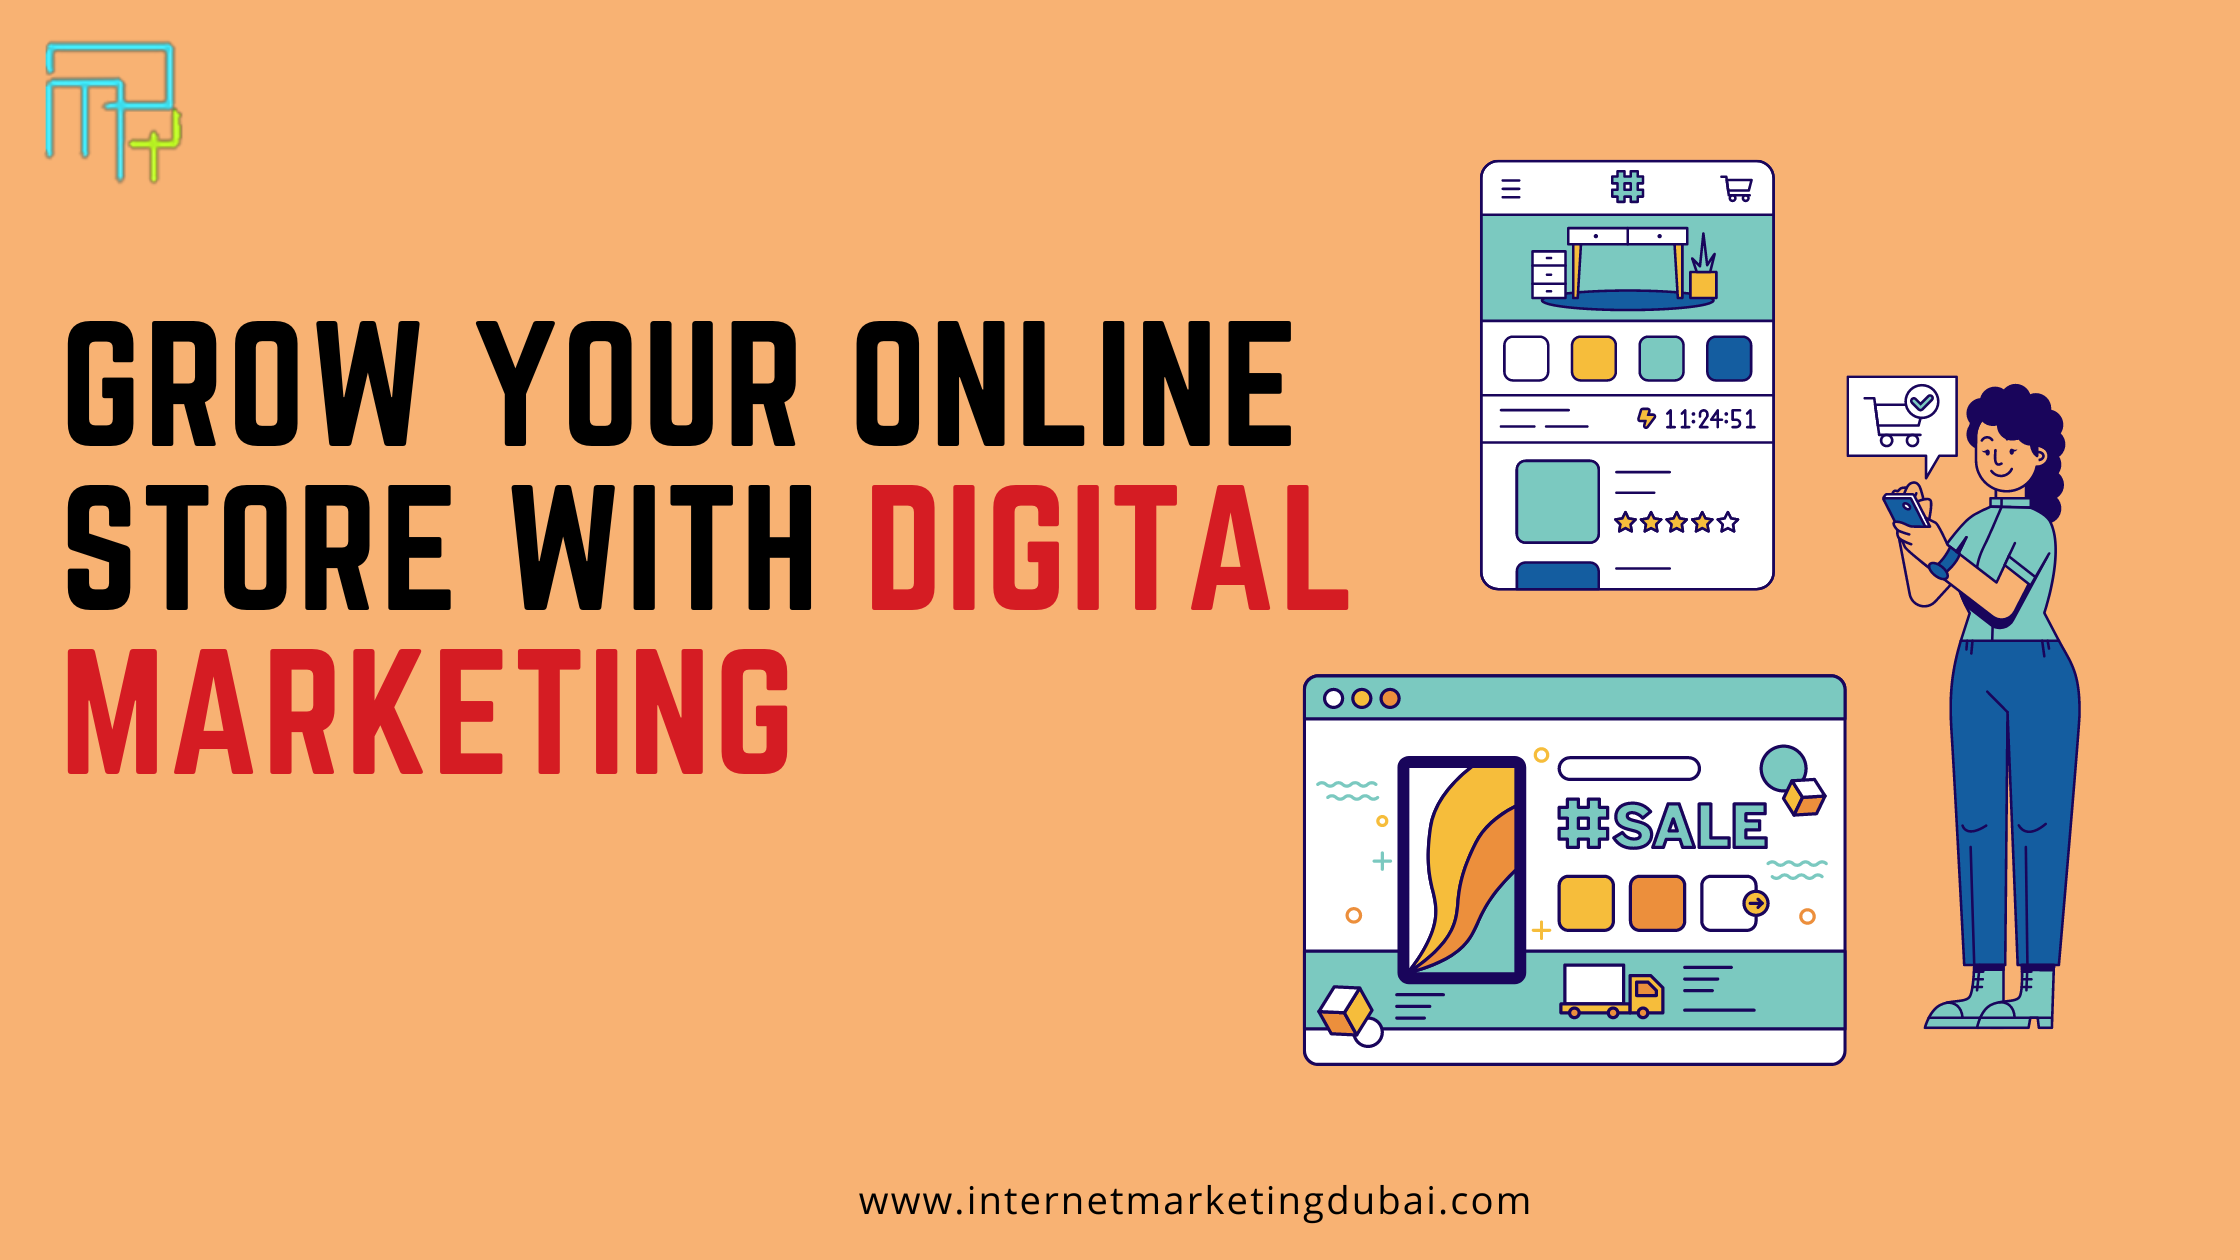 Tips to Grow Your Online Store With Digital Marketing